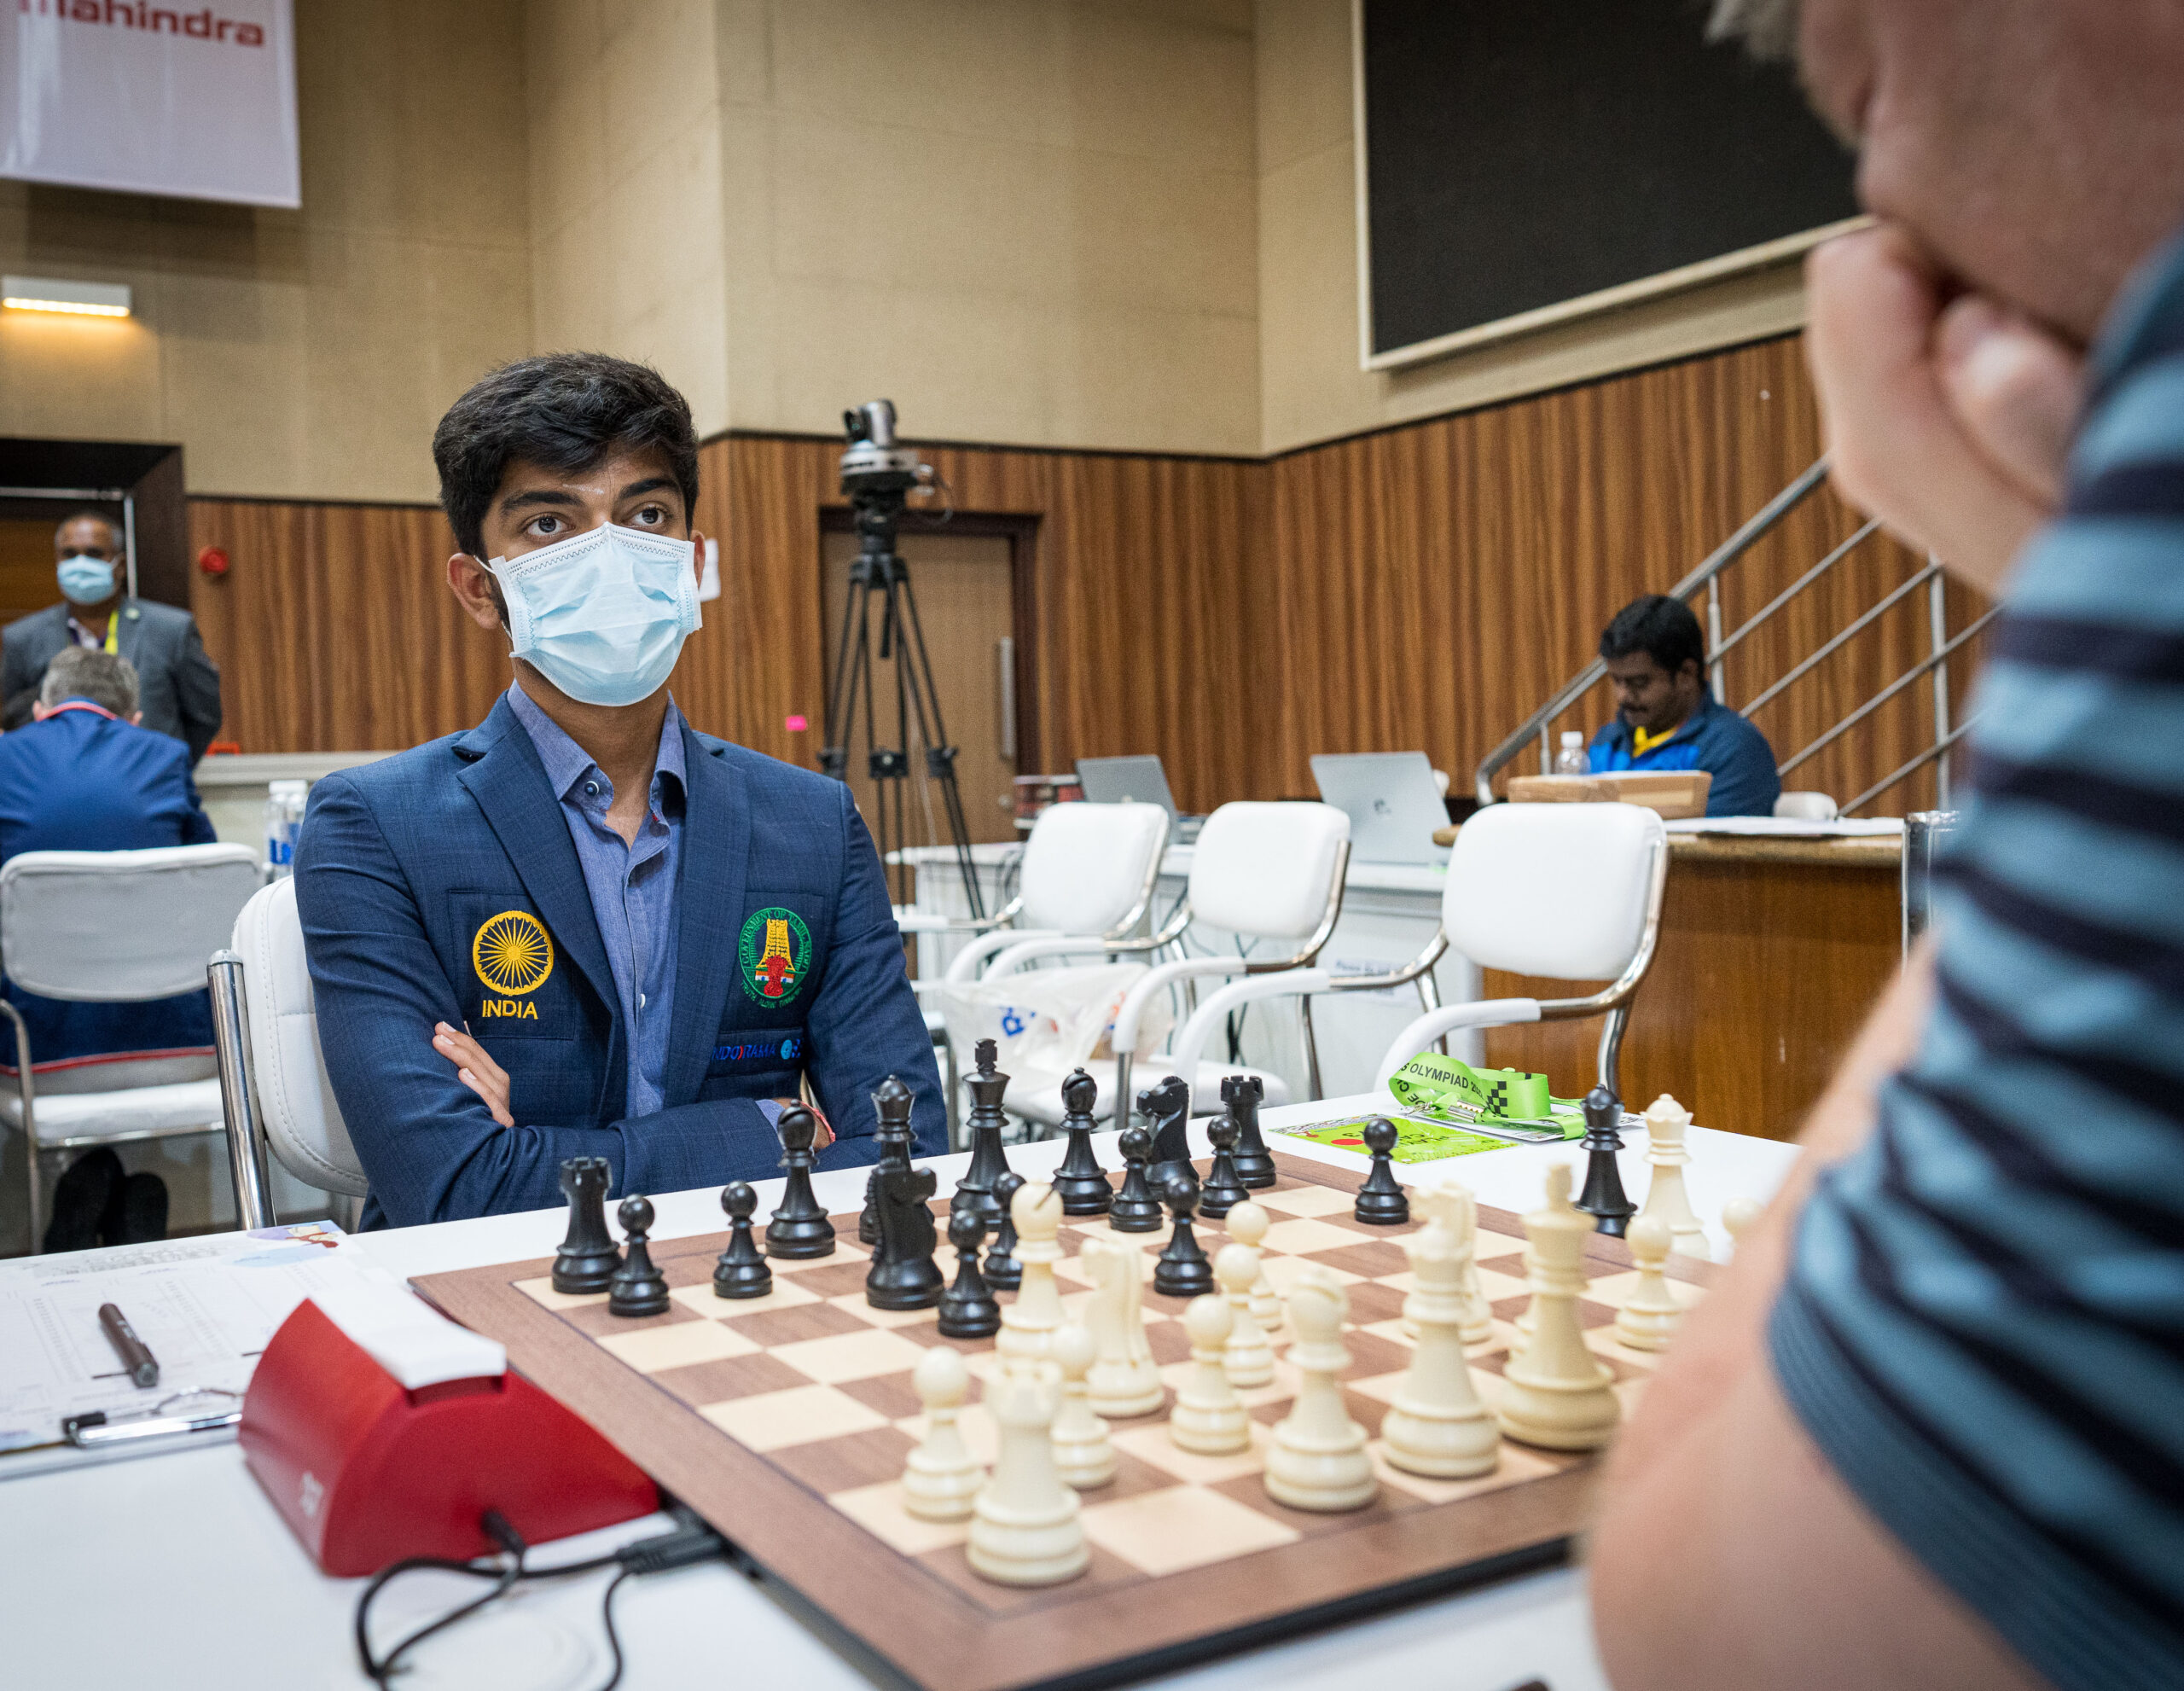 44th Chess Olympiad: Gukesh D scores his fifth win to cross 2715 mark